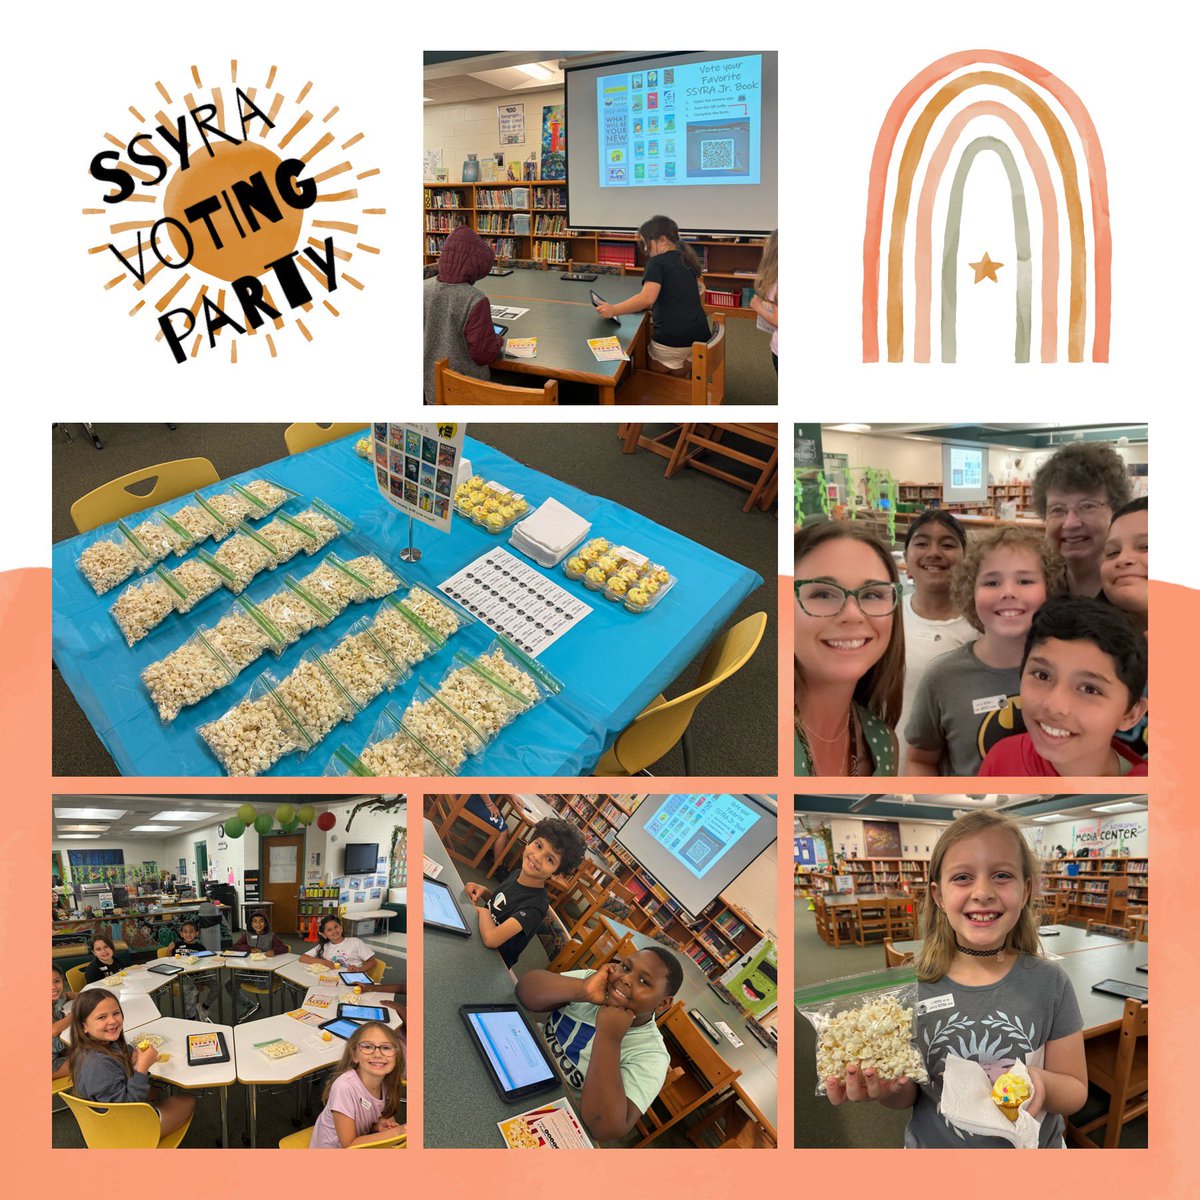 @FloridaSSYRA & @SSYRAJR voting party was a huge success! Our favorite at Spirit included Good Dogs on a Bad Day & Doggo and Pupper! @VCSVAME #Latepost